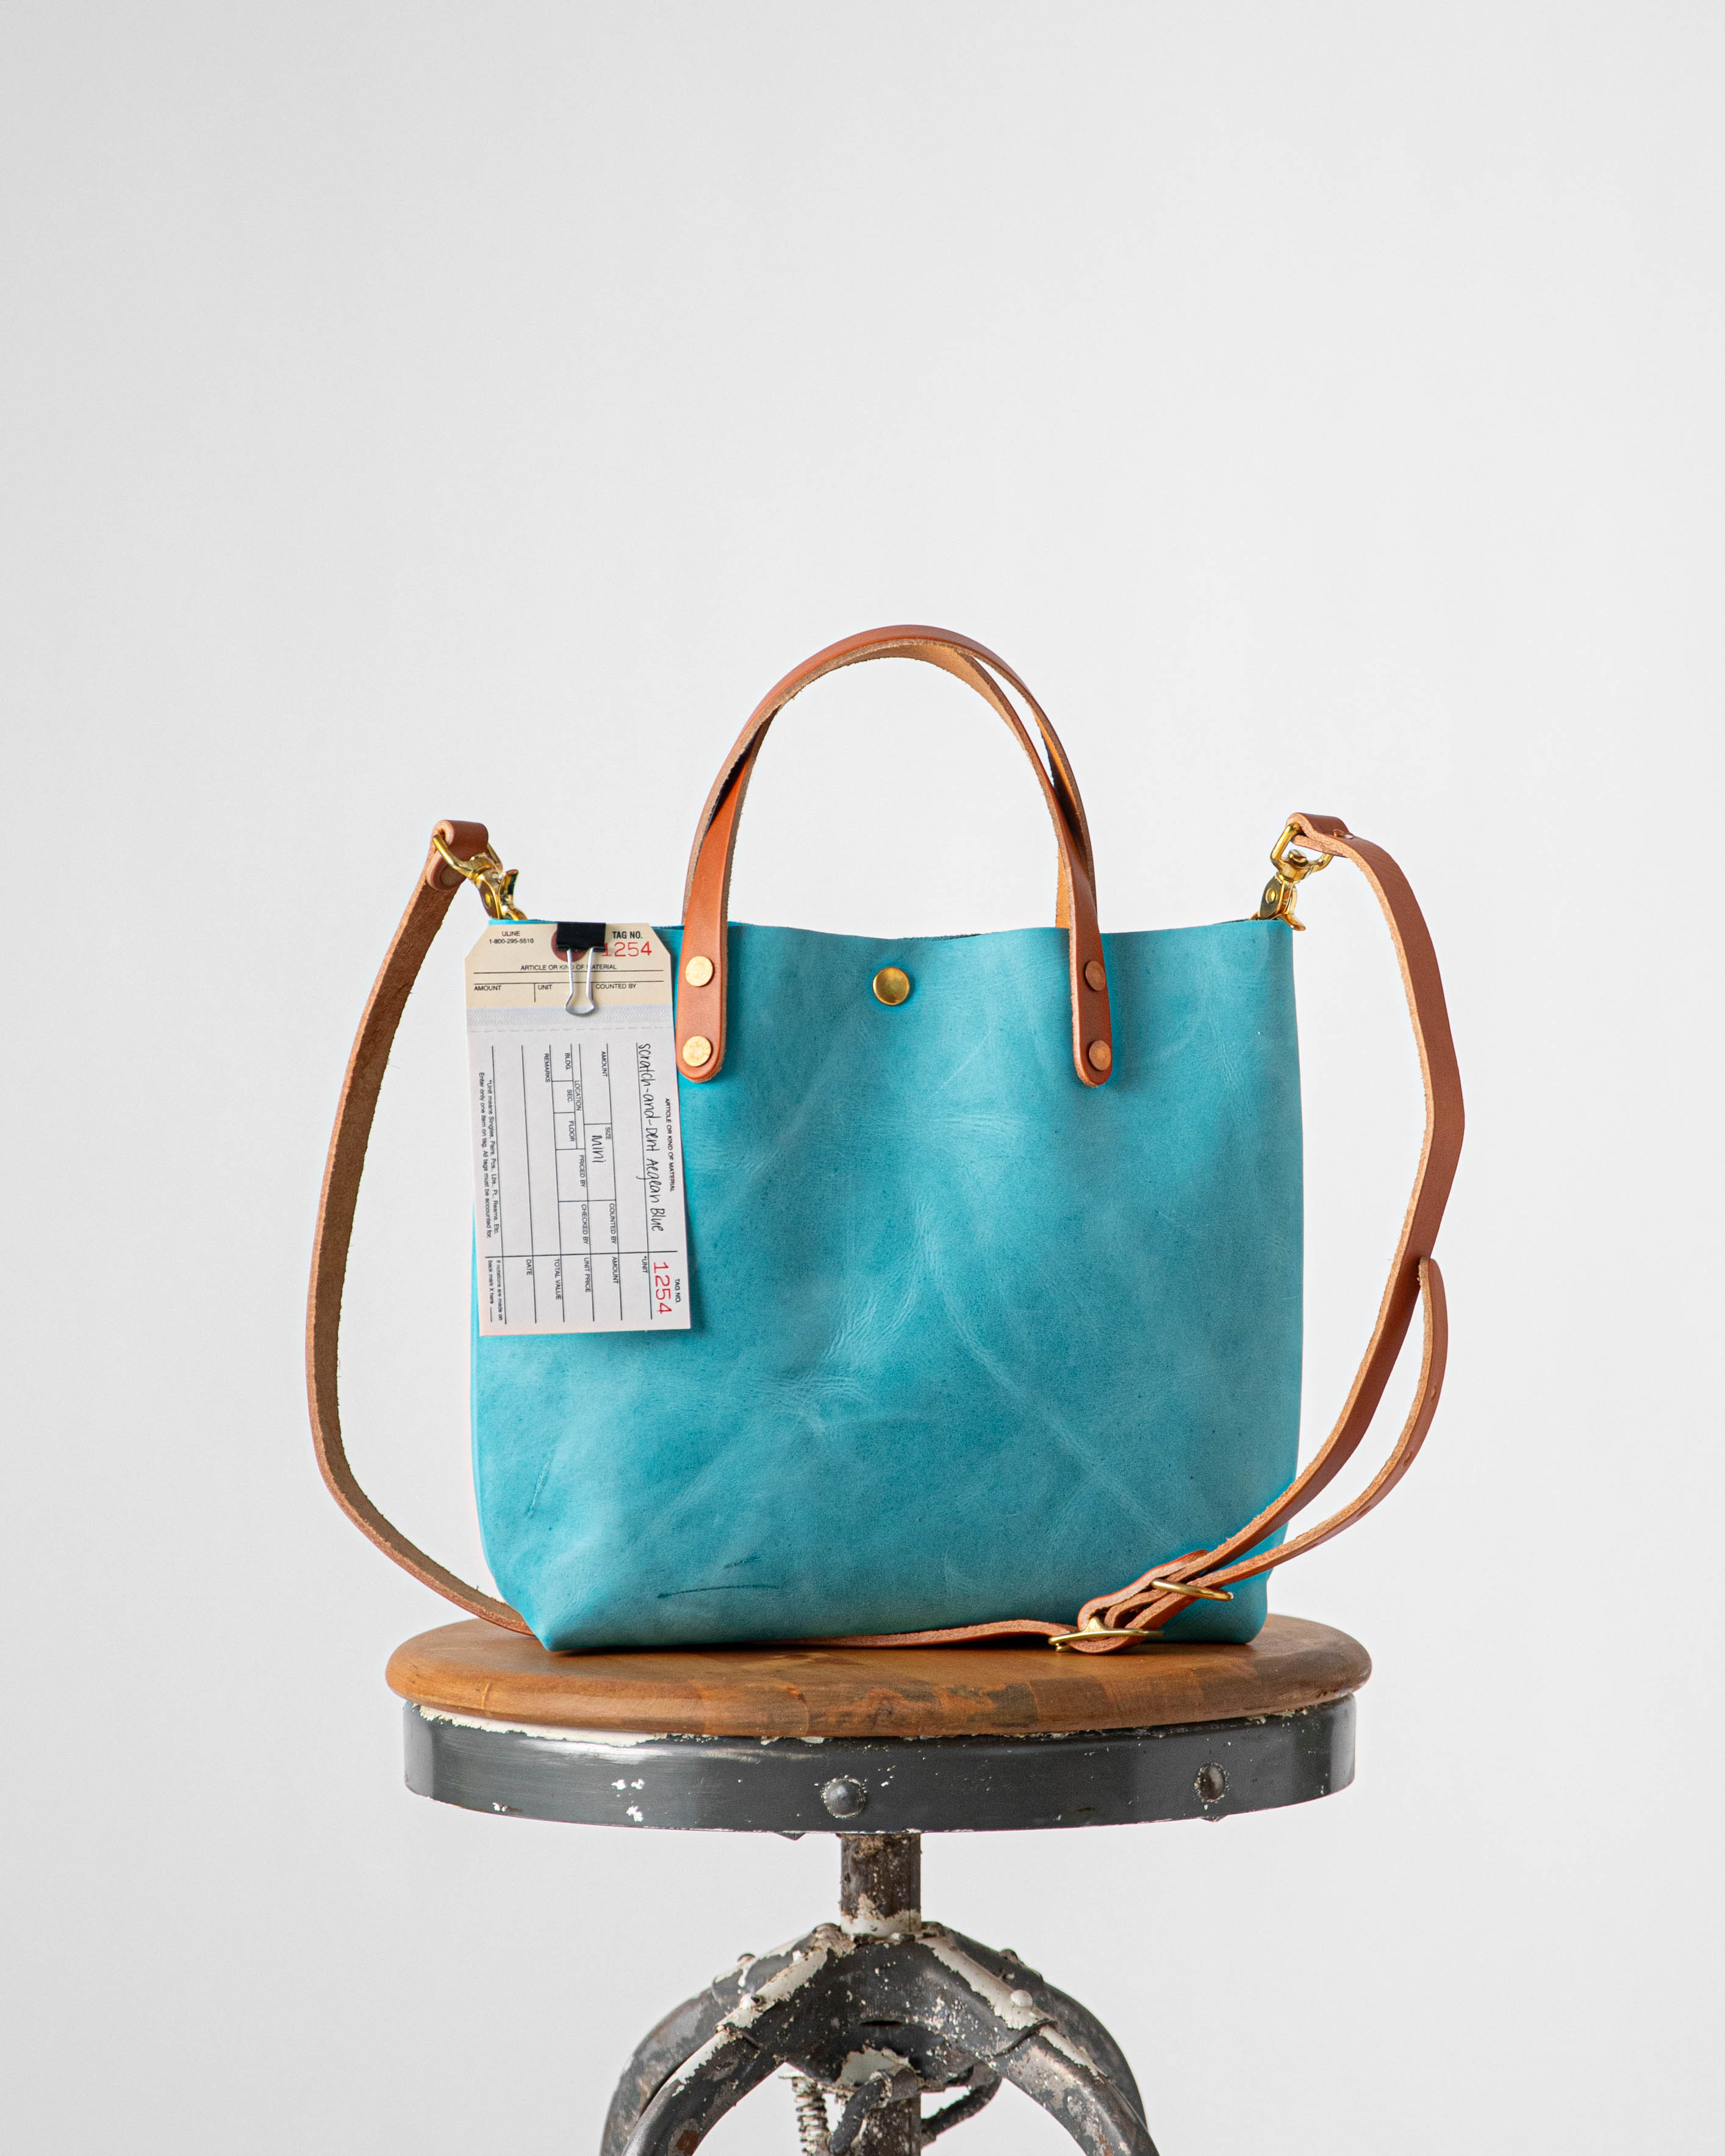 BethelHelena | Fashion House | Meet the bag that's ready for Italian  summers and beyond. Lightweight, chic, and in four refreshing colors, our  Italian Summer Bag is w... | Instagram